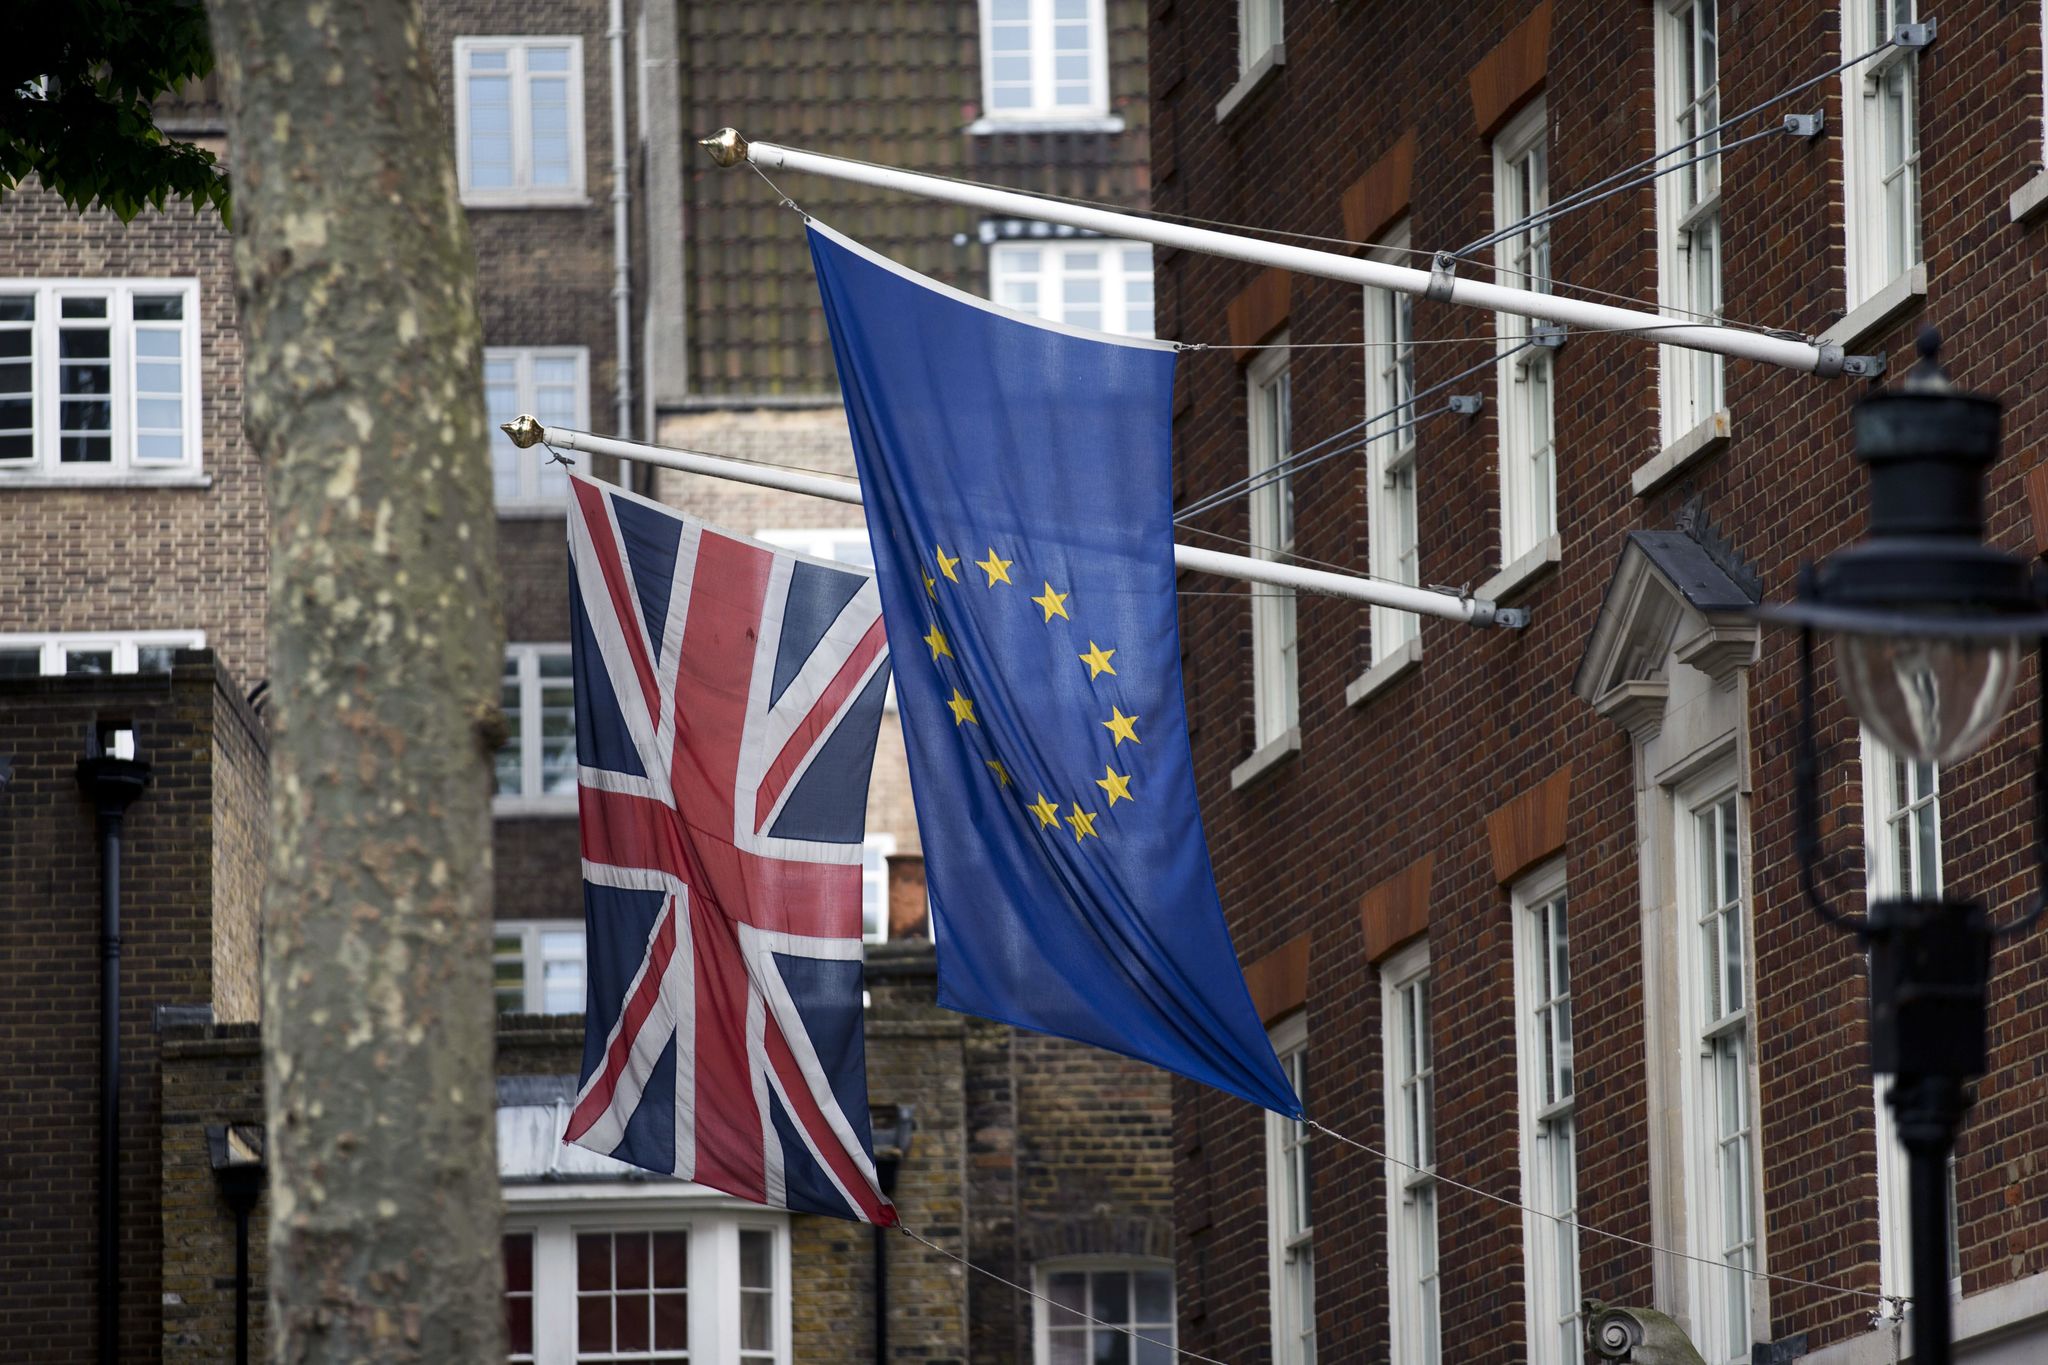 A European and British flag are displayed outside Europe House, the European Parliament’s office in London, on Wednesday. Britain votes on whether to stay in the European Union in a referendum Thursday.